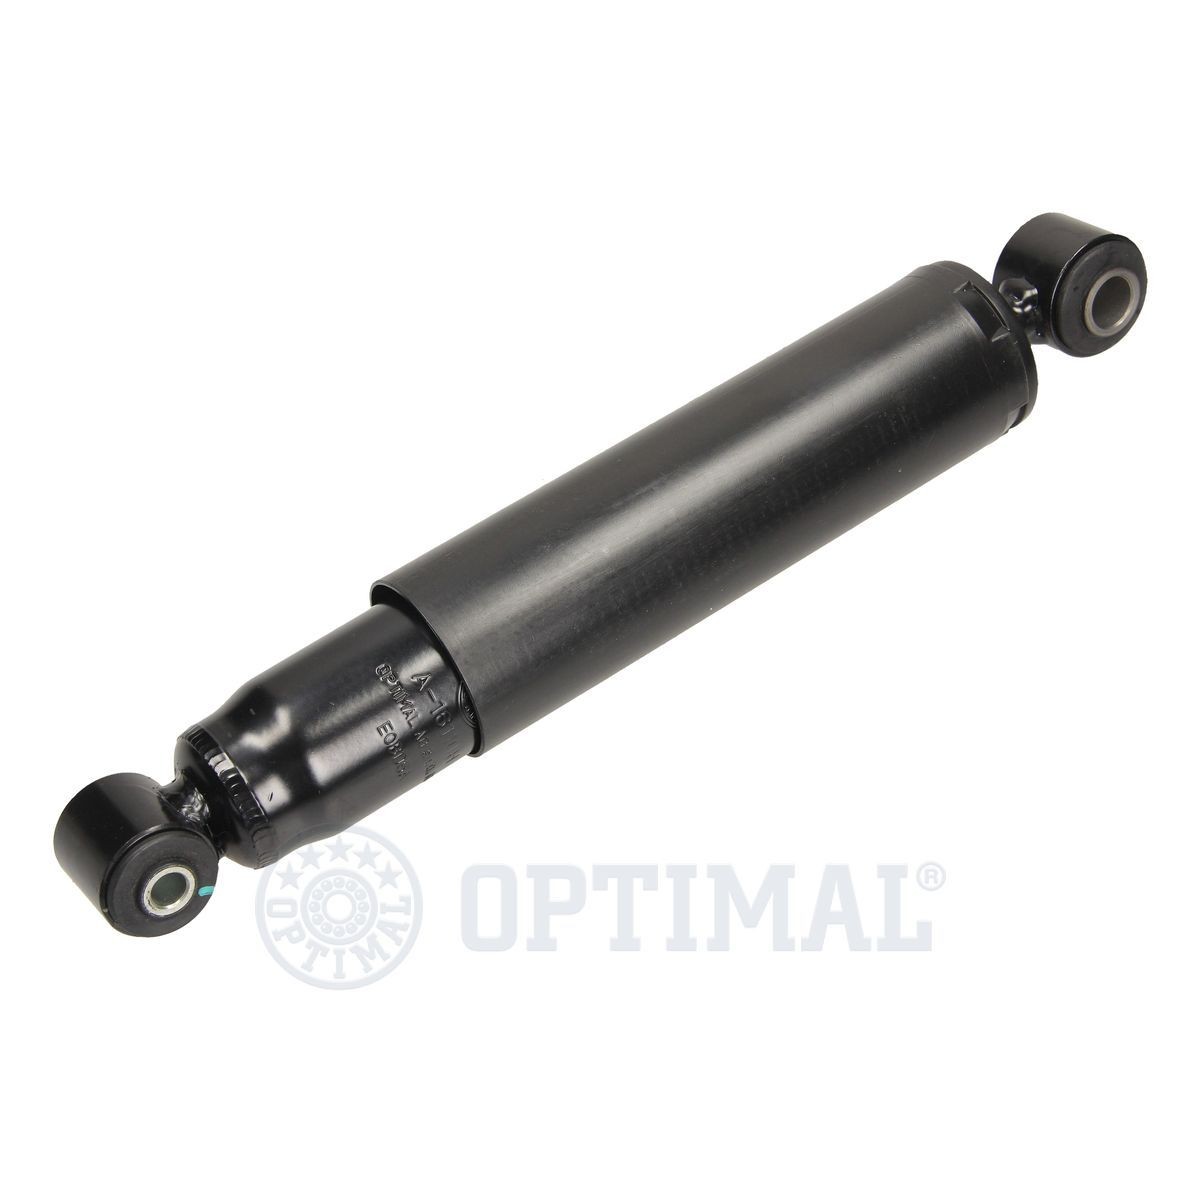 OPTIMAL Struts and shocks rear and front PEUGEOT J5 Platform / Chassis (280) new A-16110H